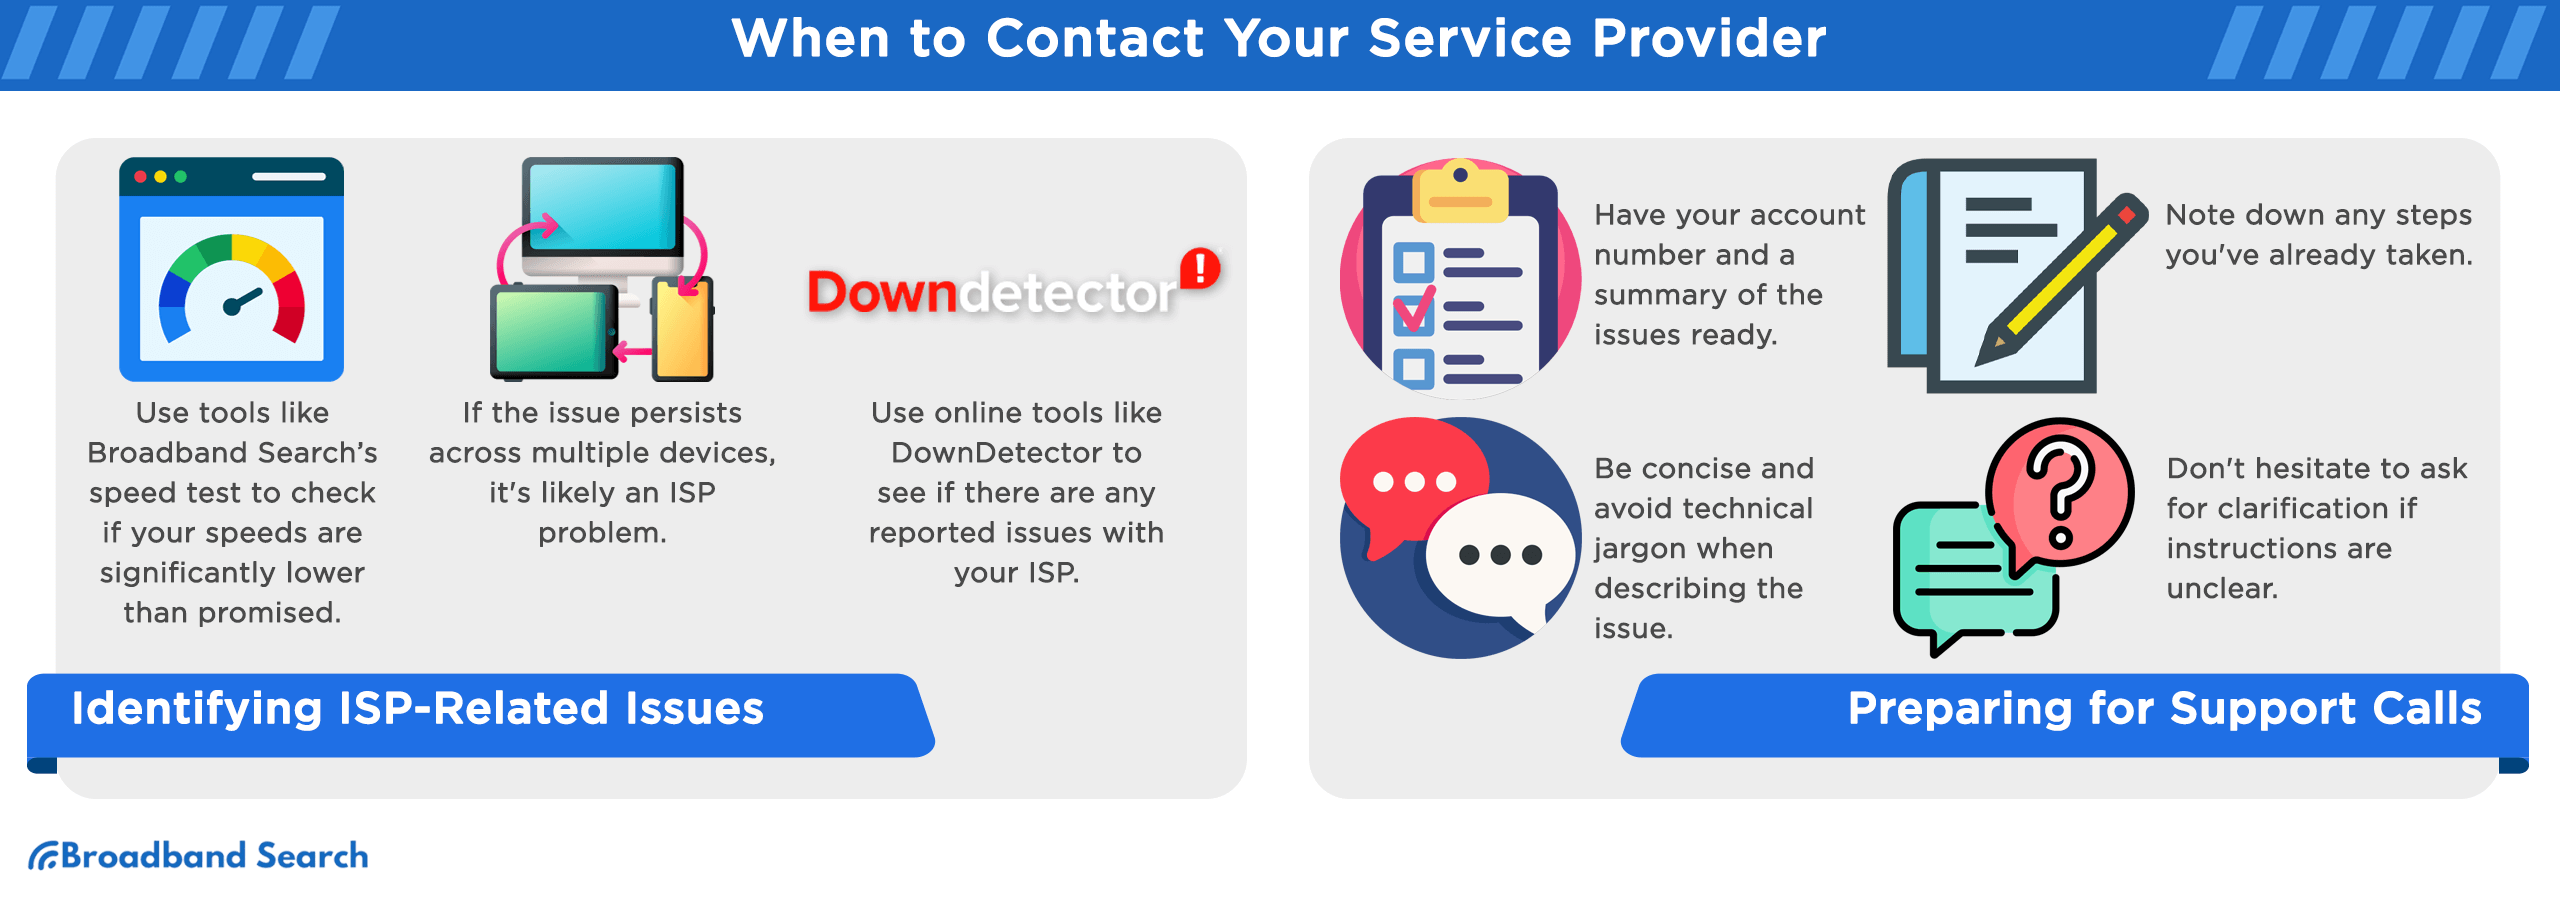 When to contact your service provider